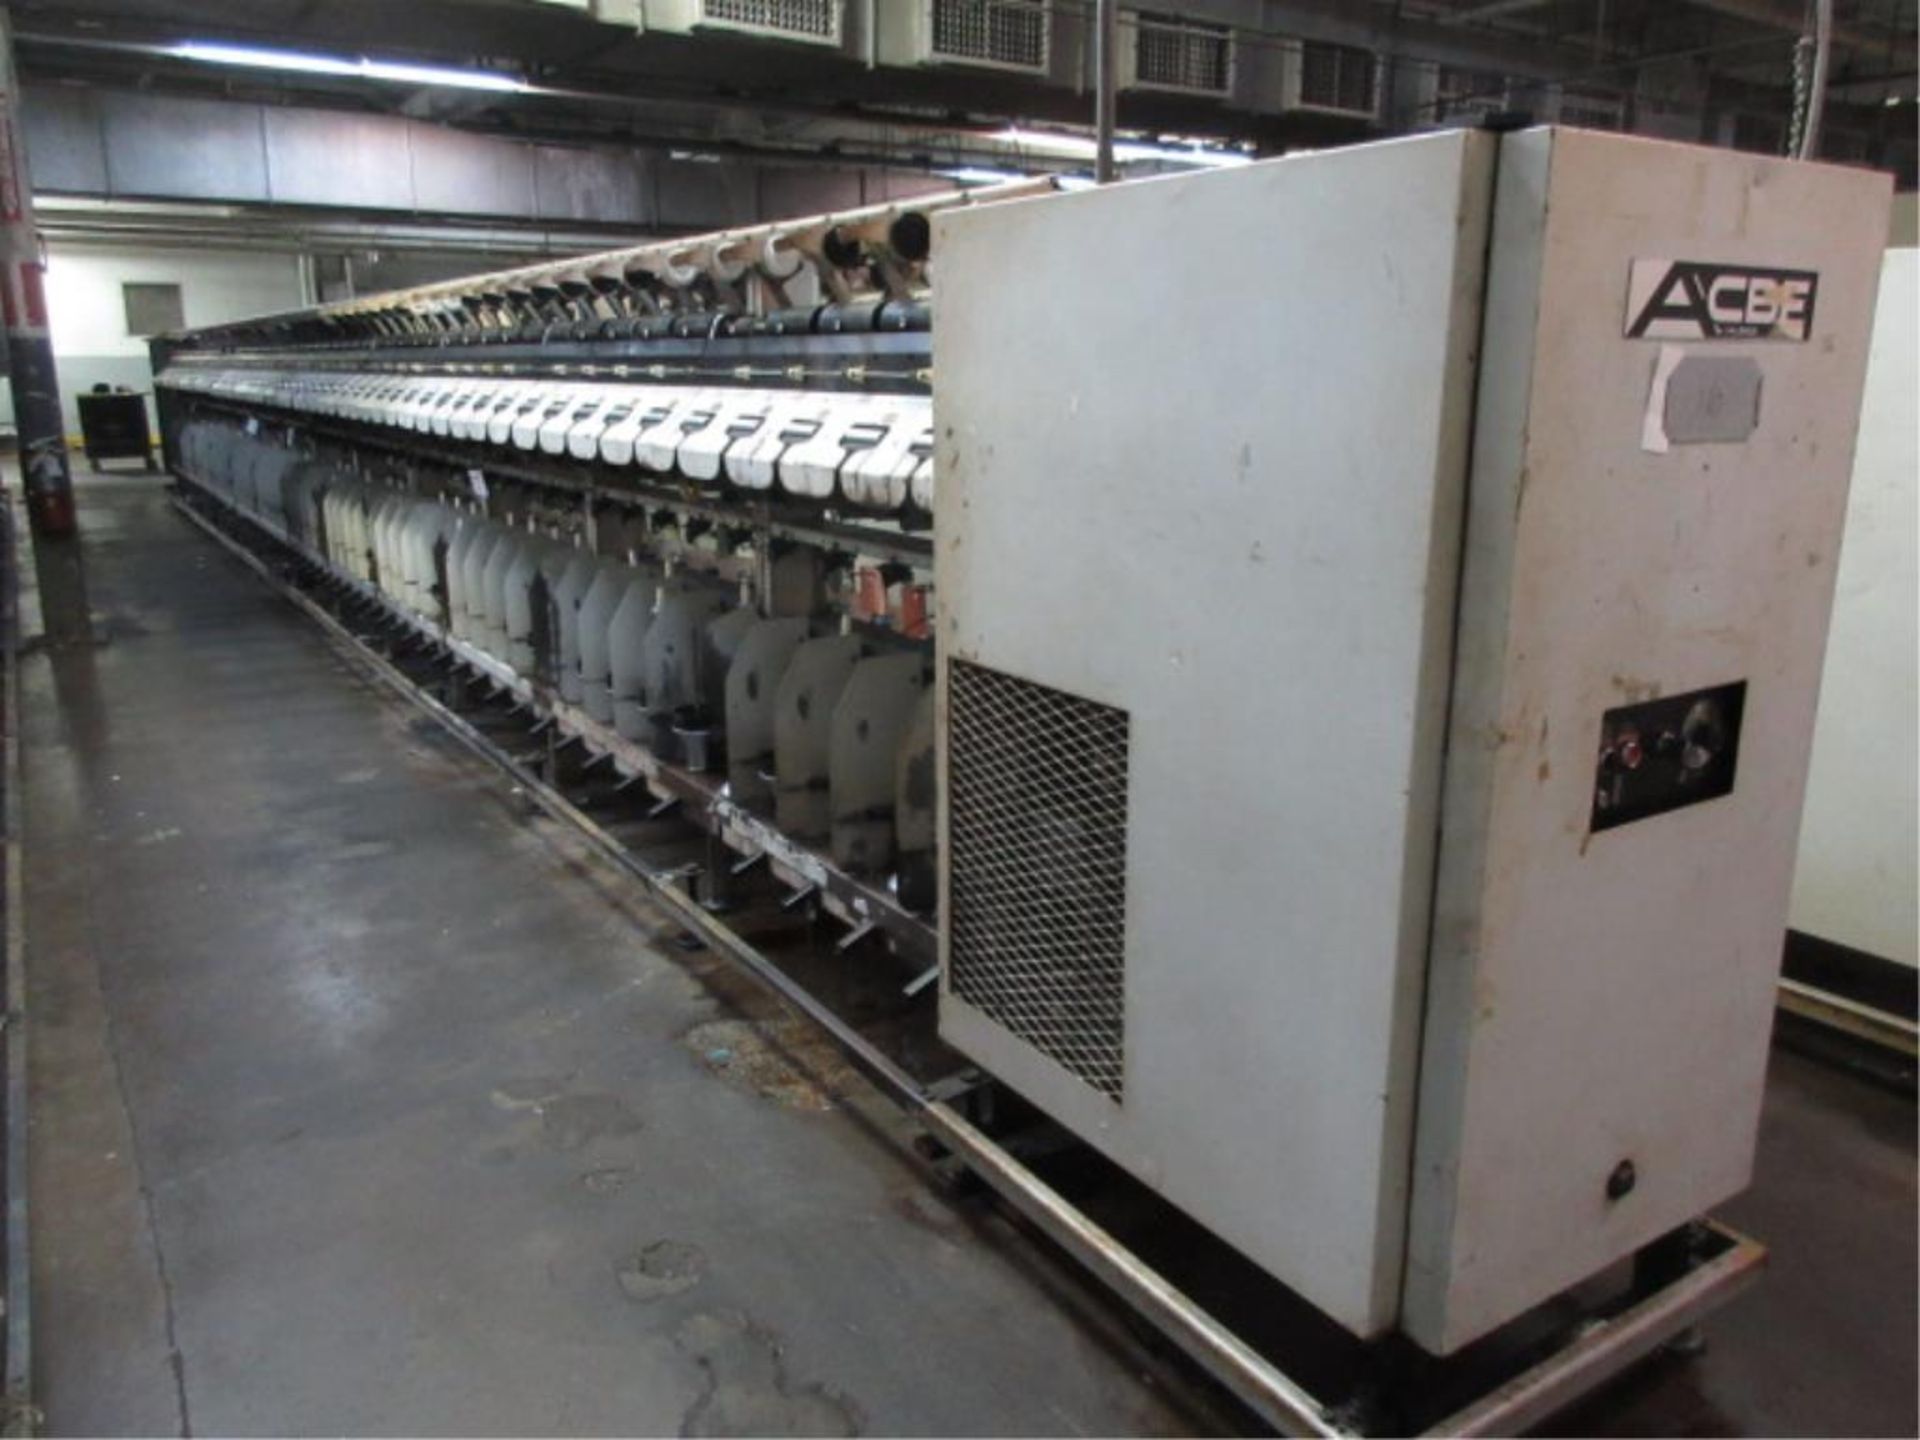 ACBF 3055 BI 2X1 Twisting Machine, (1983), 120 spindles, said to be in running condition. SN# T410- - Image 2 of 8